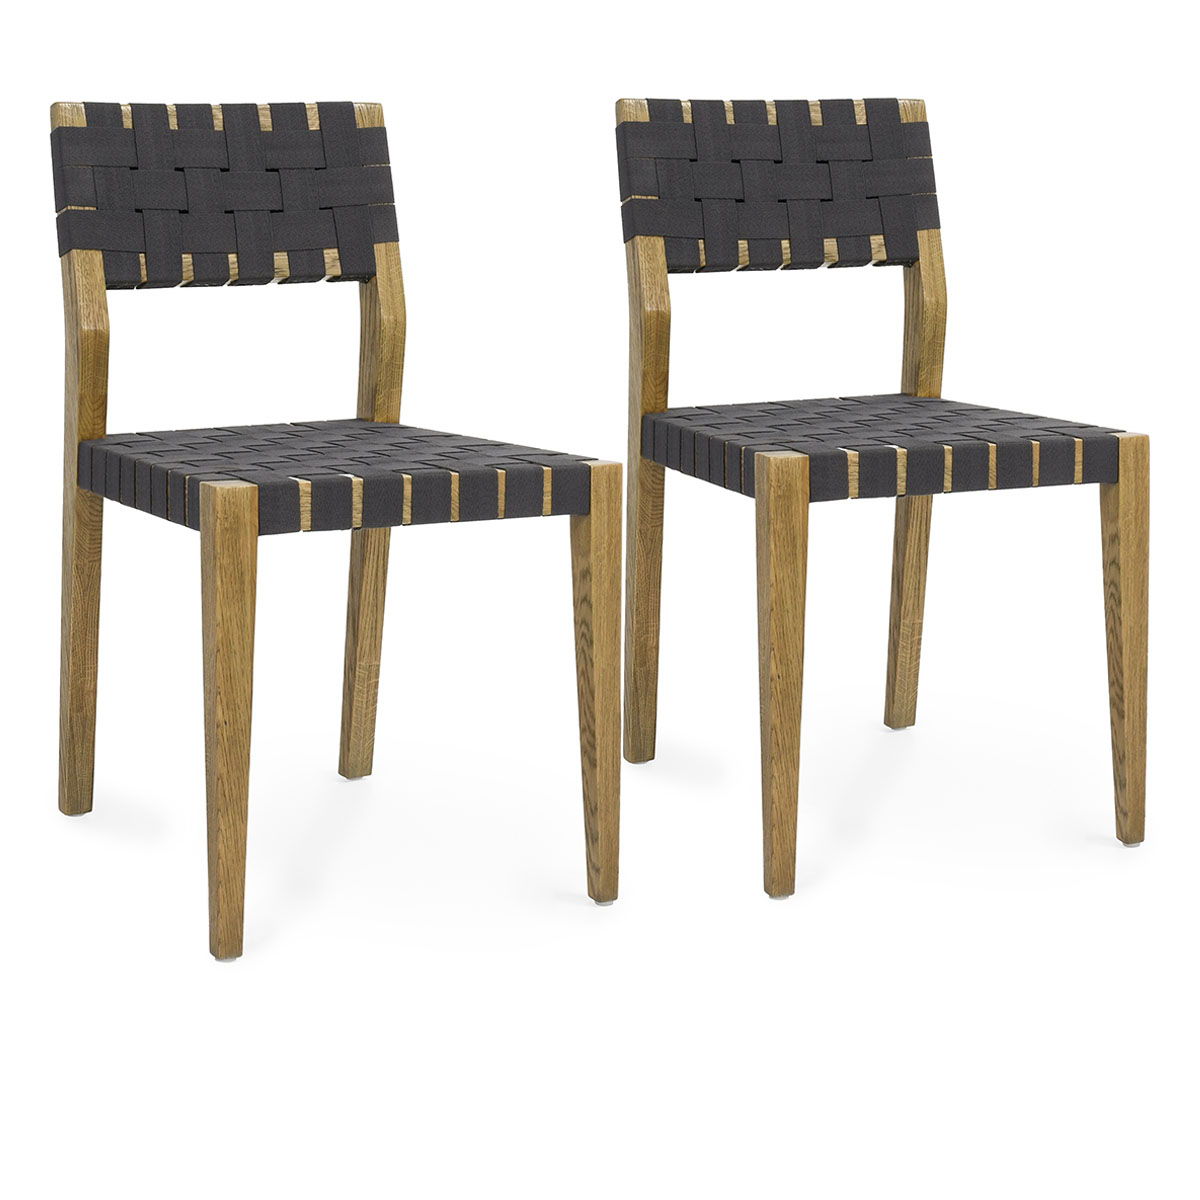 Orlando - Wood Dining Chair (Set of 2) - Natural/Charcoal